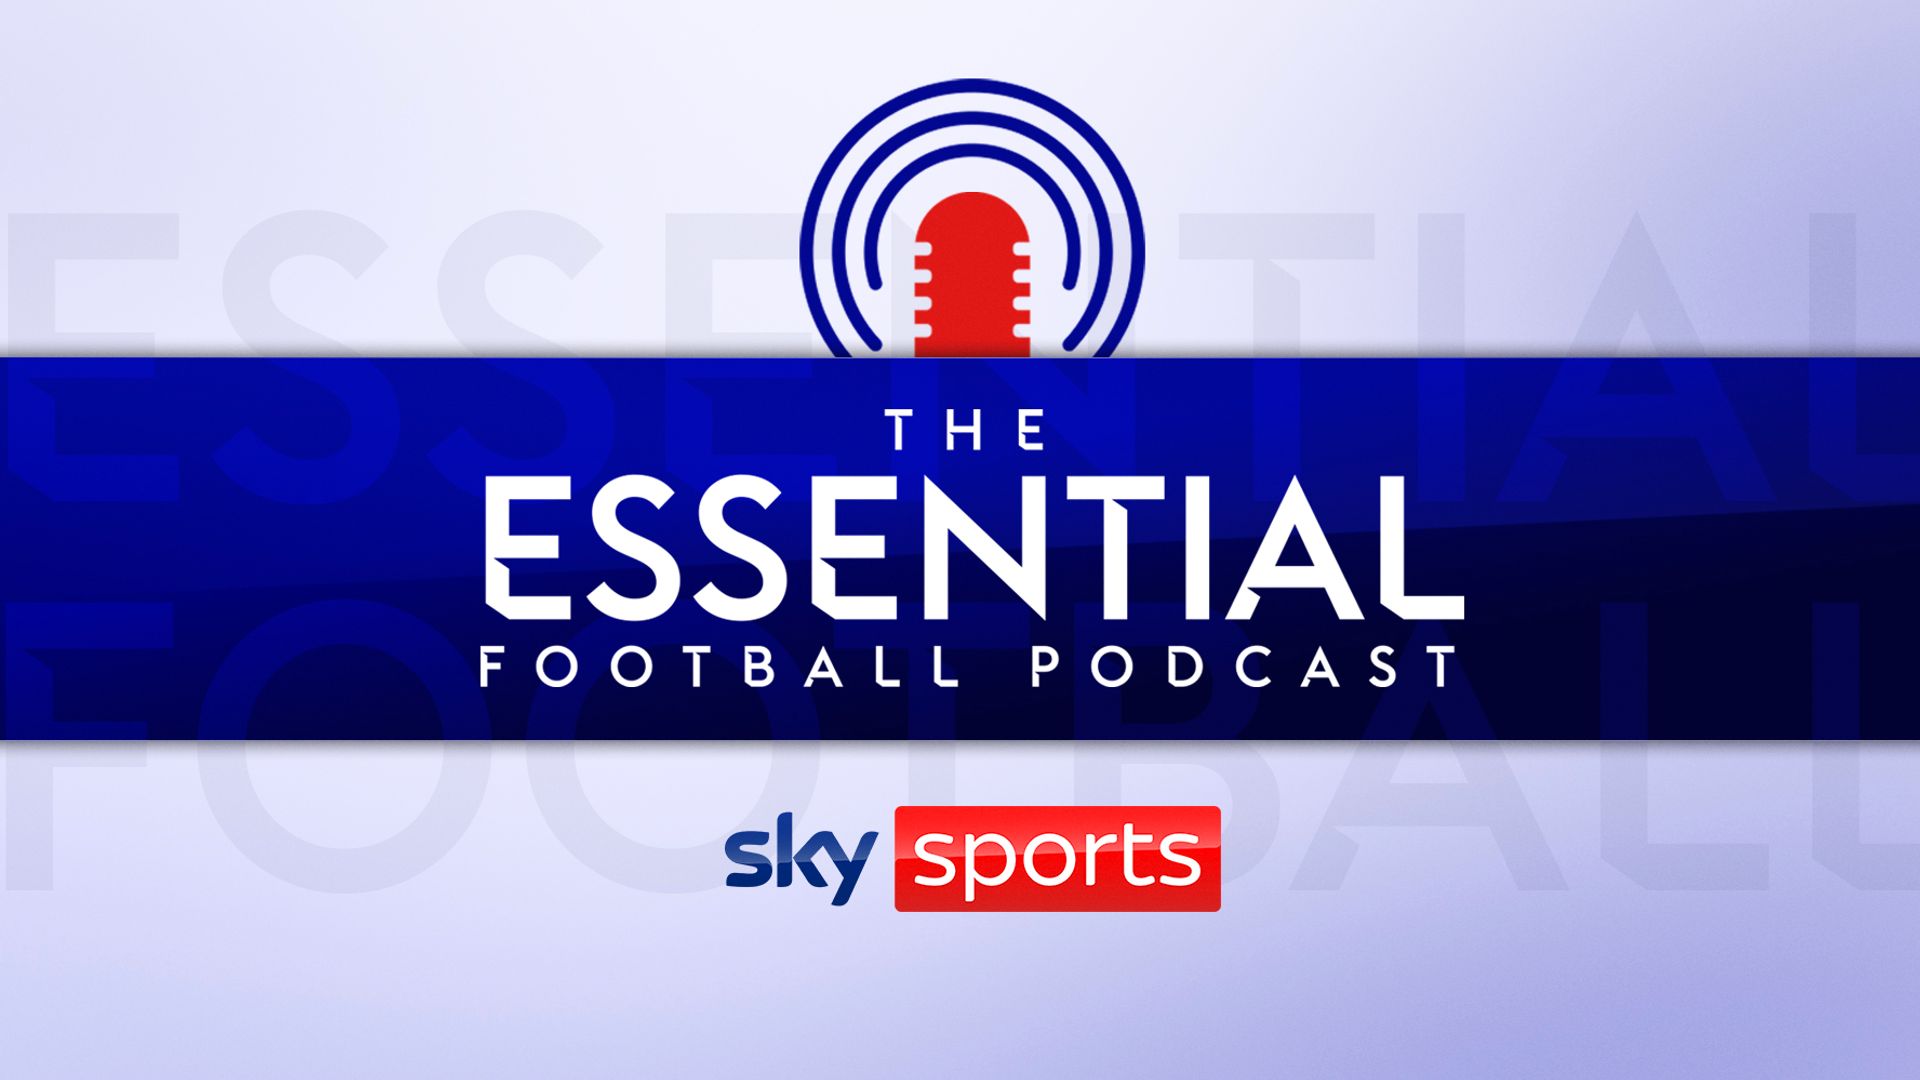 PODCAST: The inside story on Ronaldo's situation at Man Utd